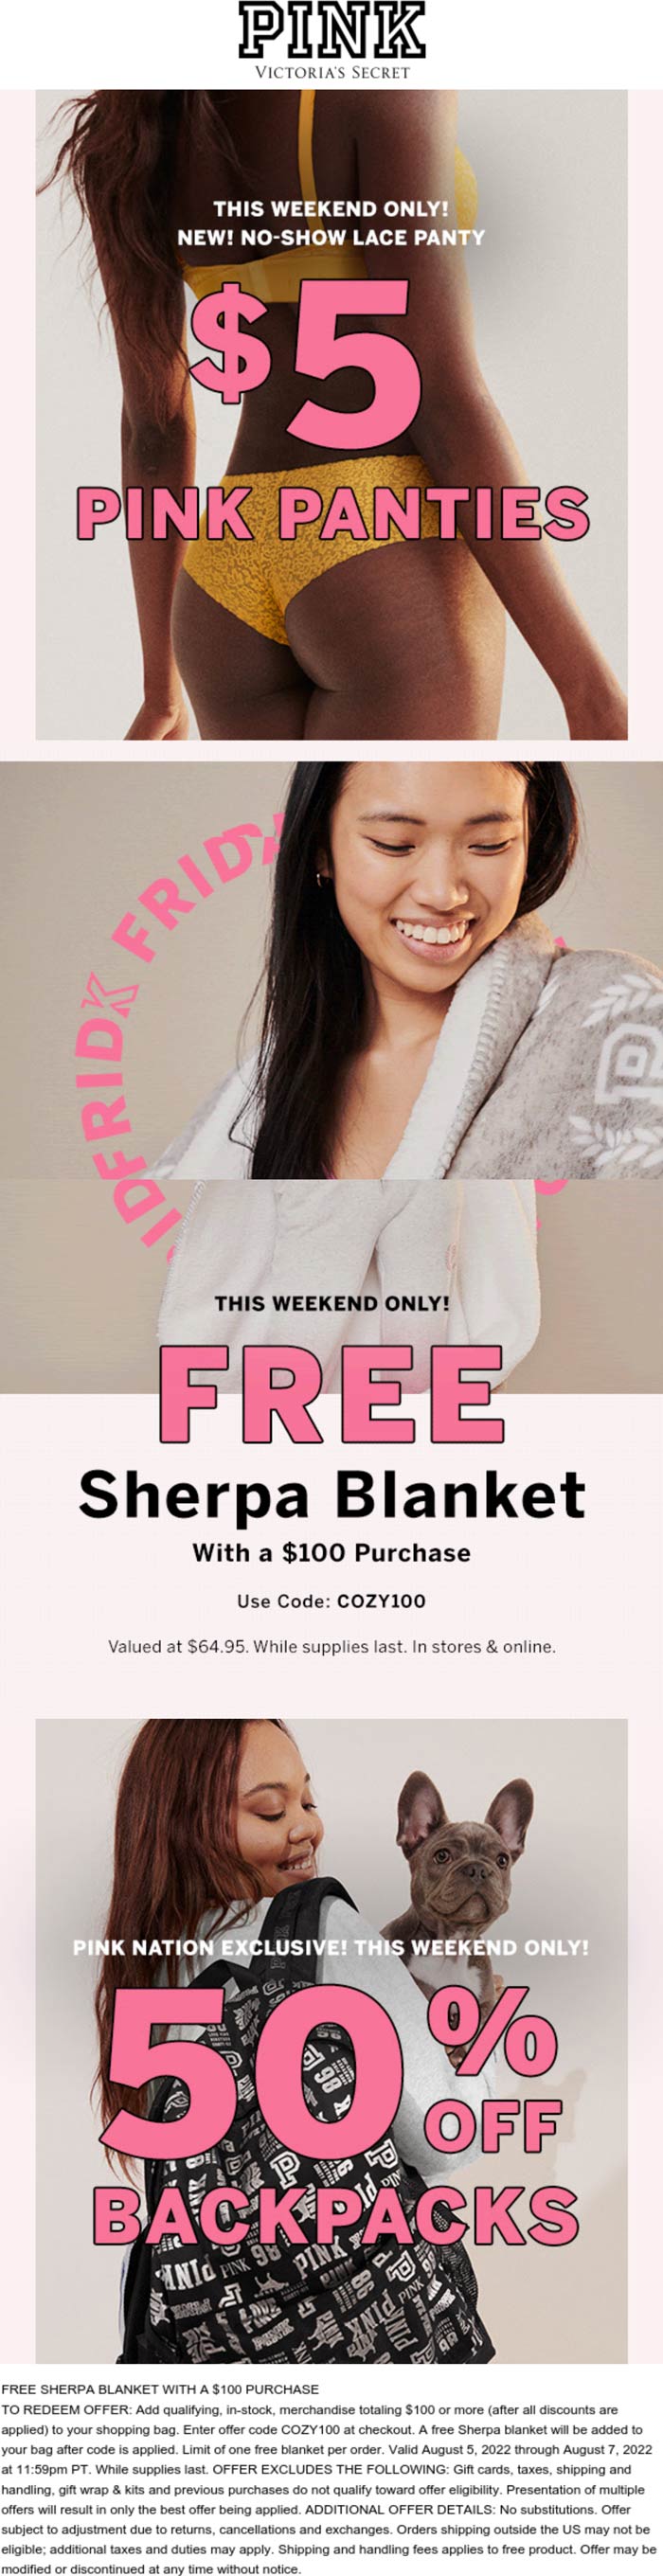 PINK stores Coupon  50% off backpacks, $5 panties & free sherpa blanket on $100 at PINK, or online via promo code COZY100 #pink 